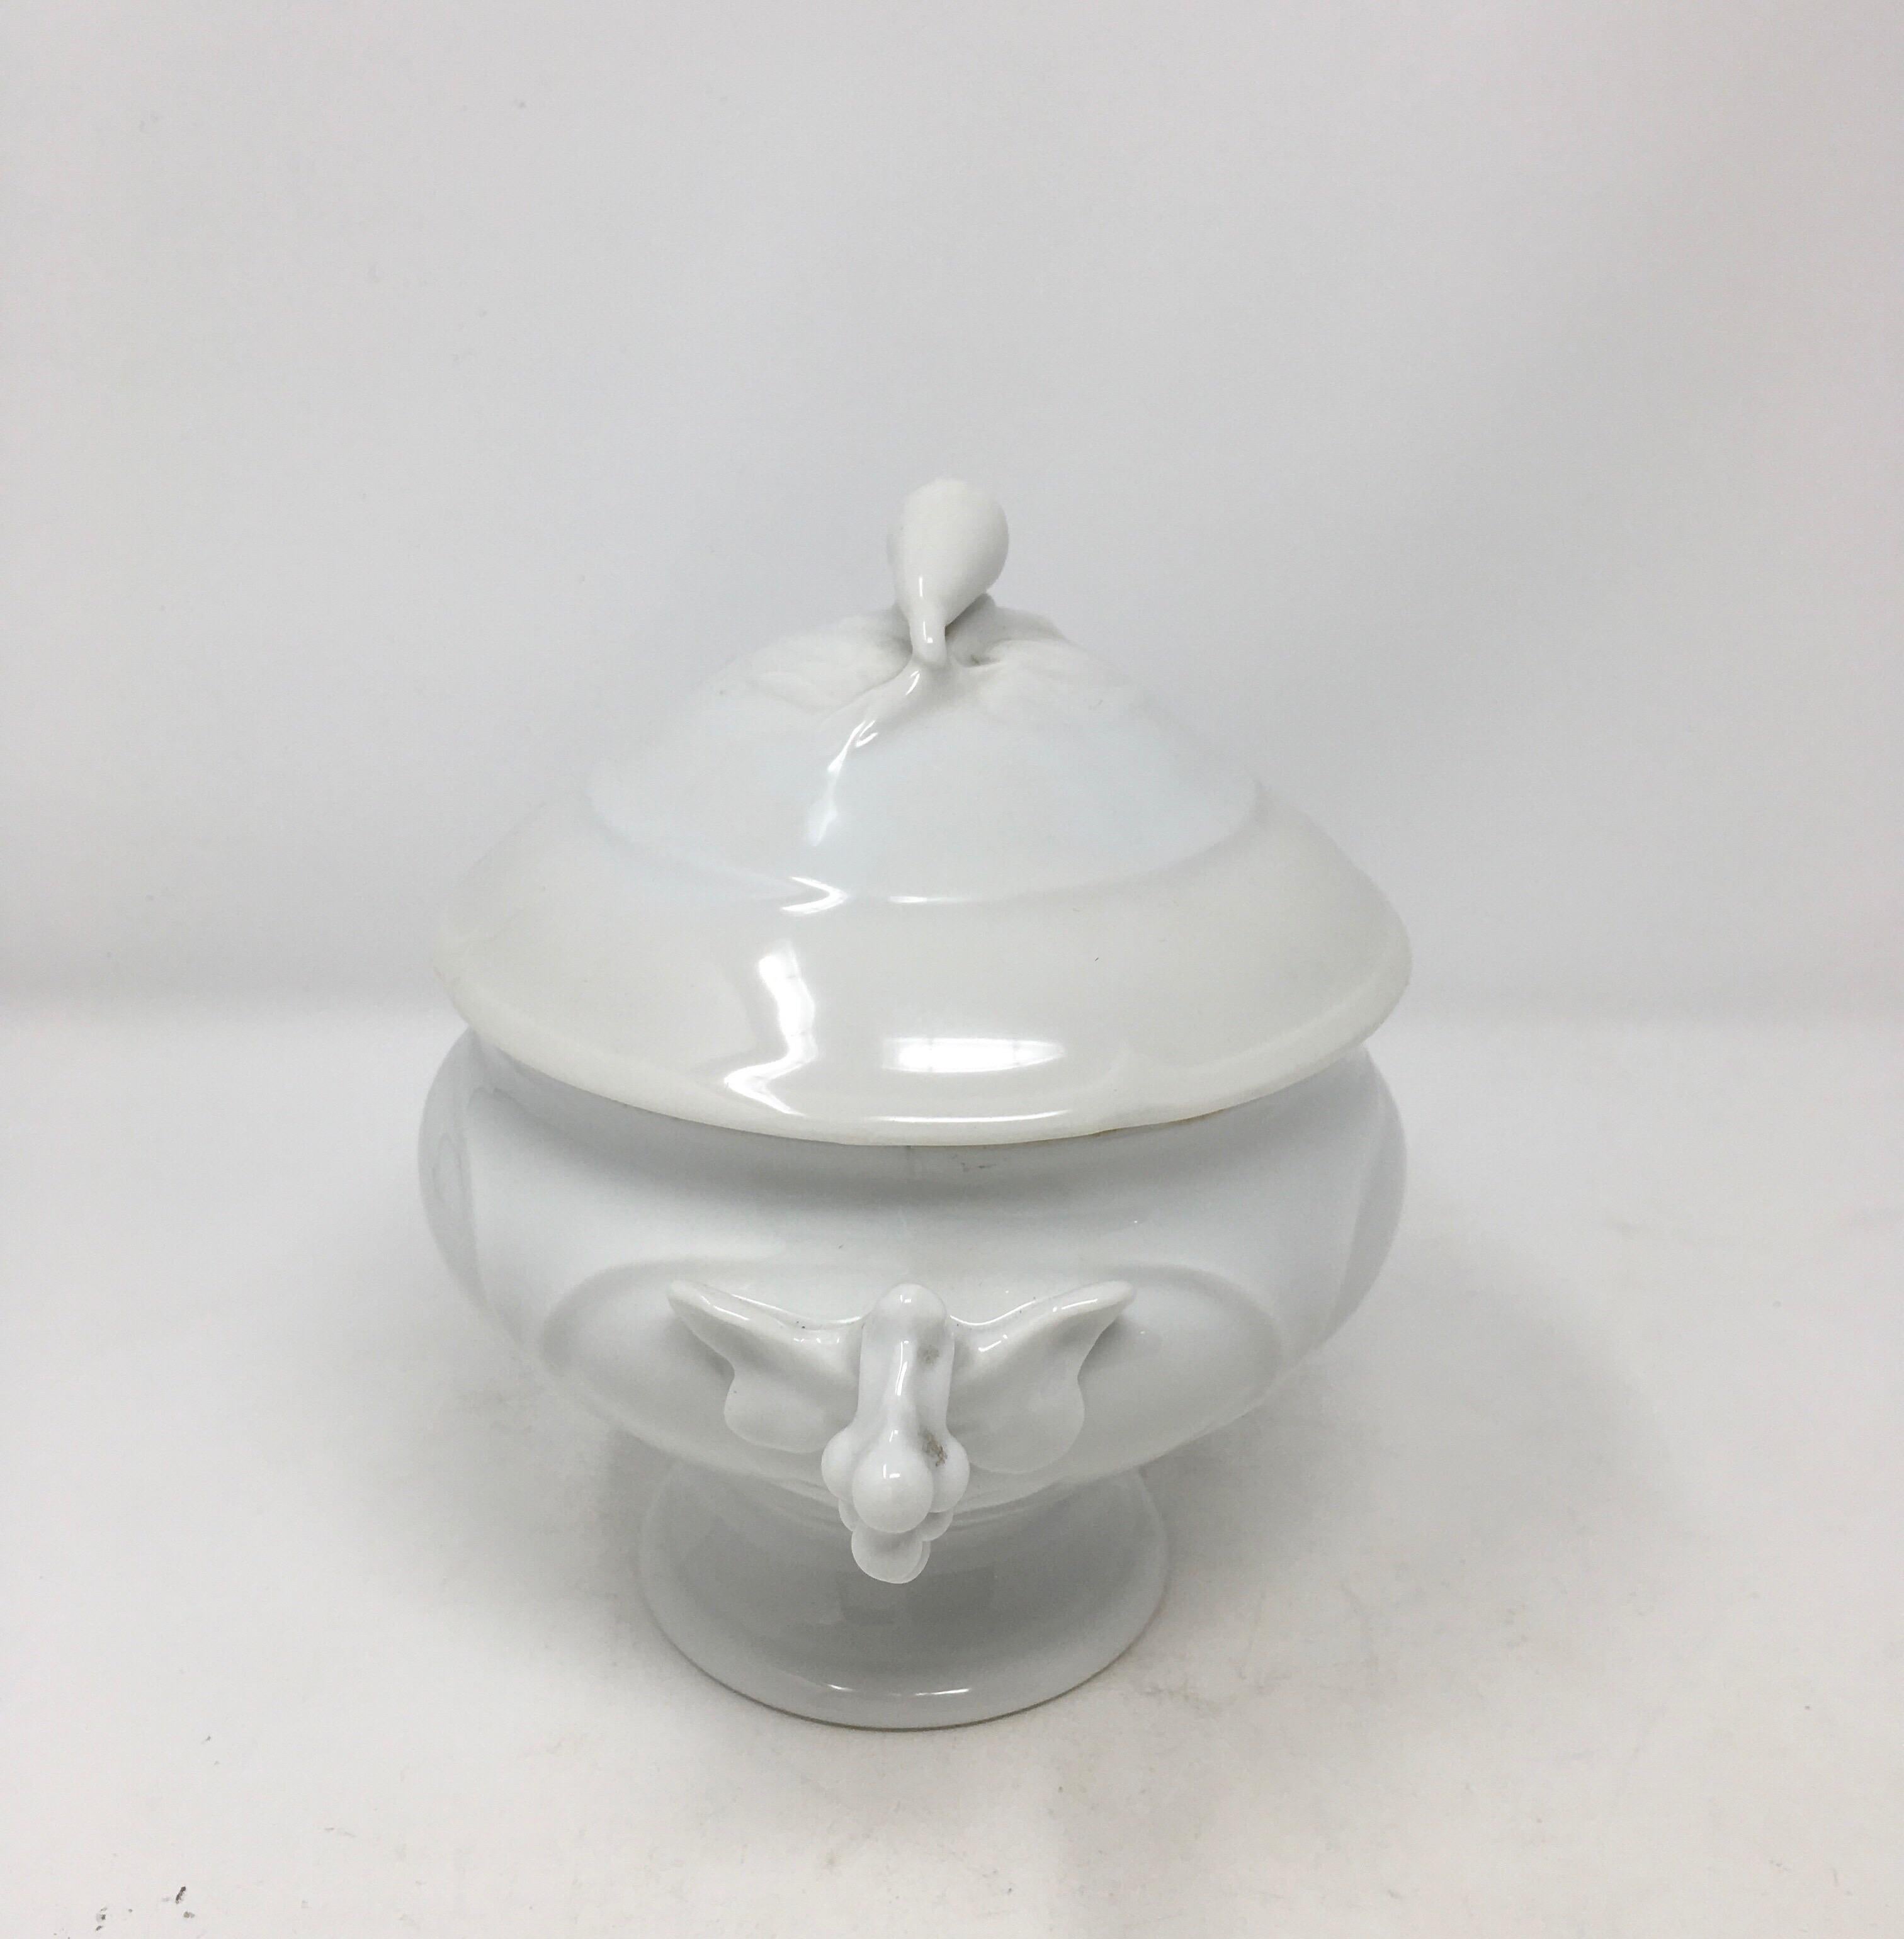 A gorgeous 19th century small glazed, white ironstone soupier from France. The soupier sits on a pedestal base and is complete with two ornate handles and a stylish lid that features a decorative pull handle. With its beautiful antique glazed finish